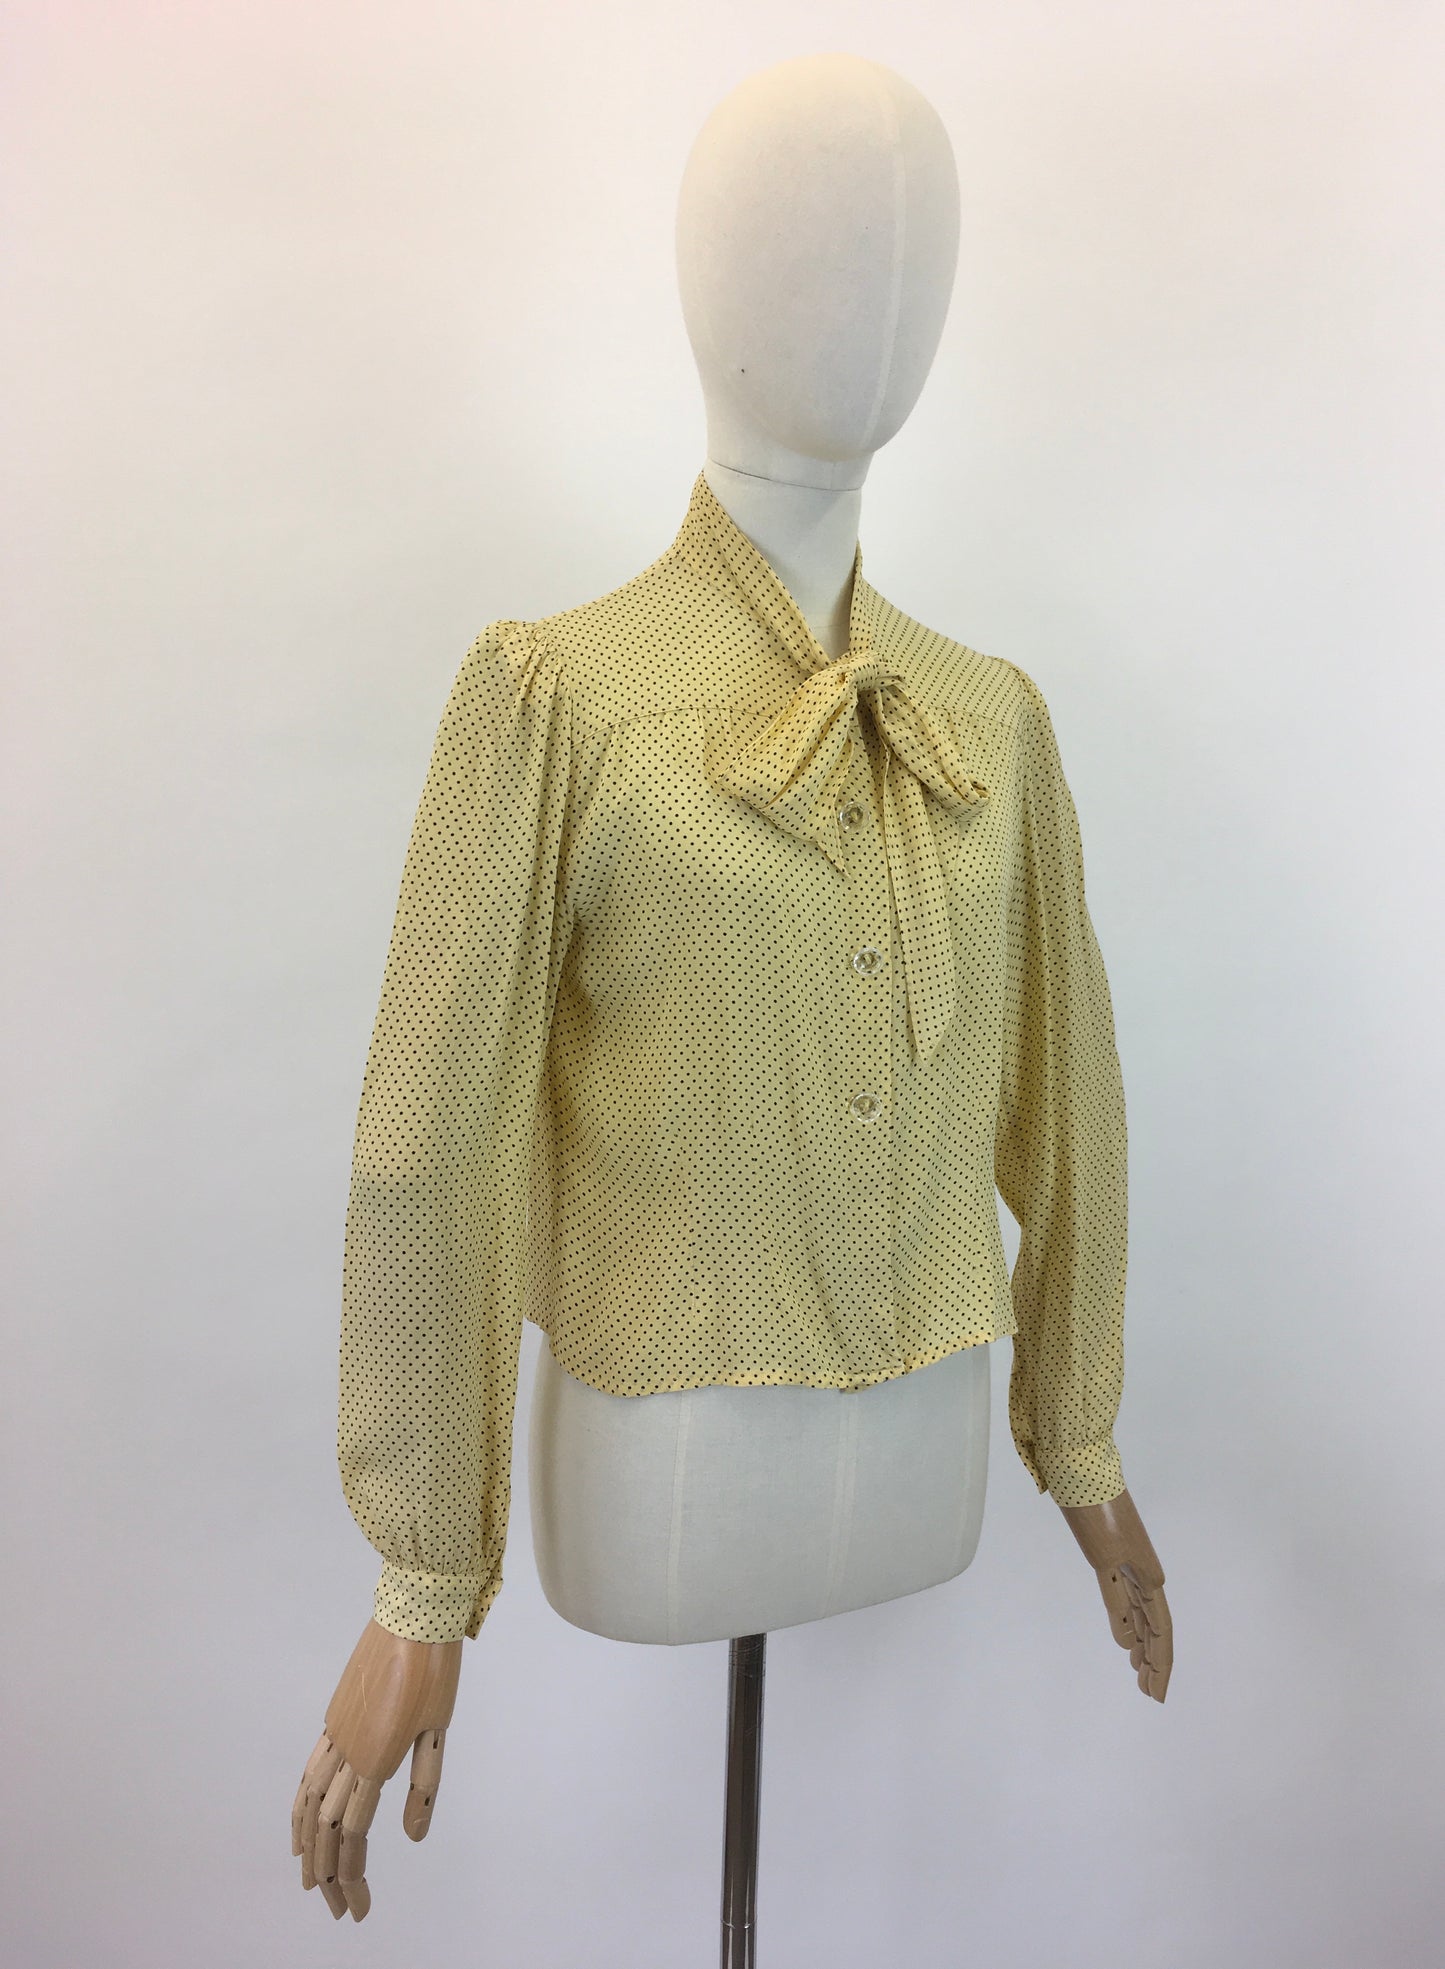 Original 1940's Darling Pussy Bow Blouse - In A Delightful Yellow Polka Dot Crepe